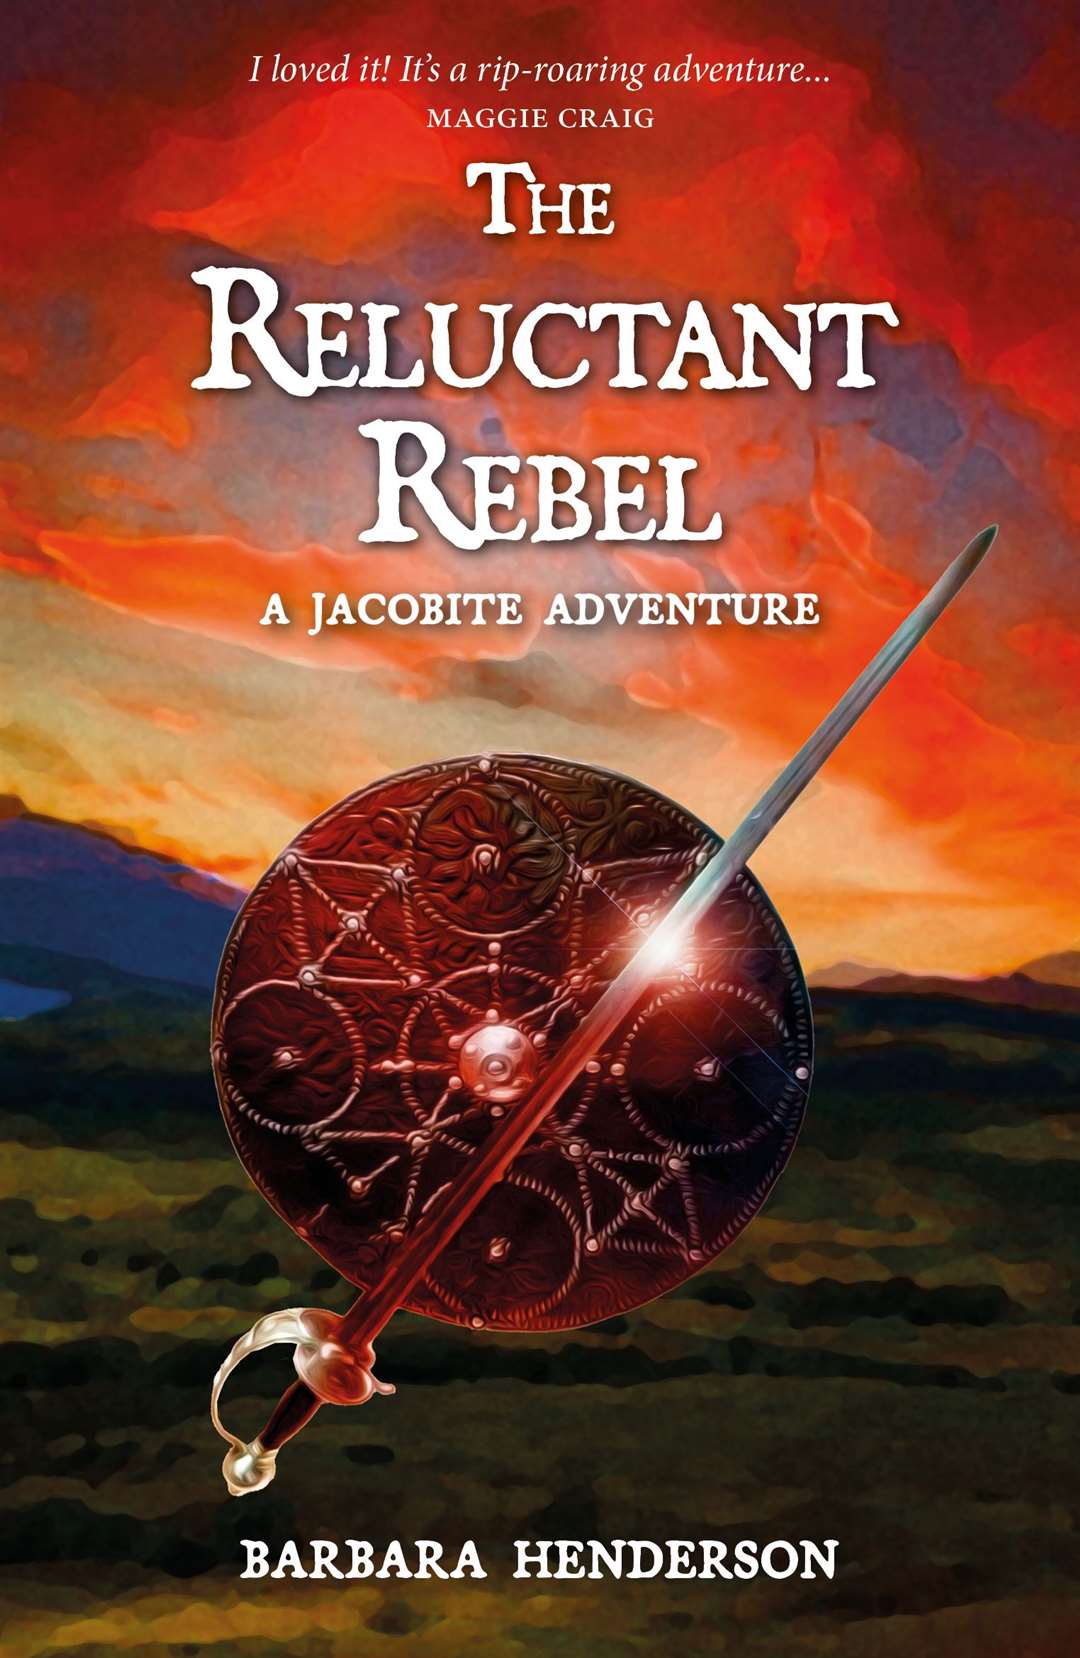 The Reluctant Rebel - BArbara Henderson's latest book for late primary age youngsters.